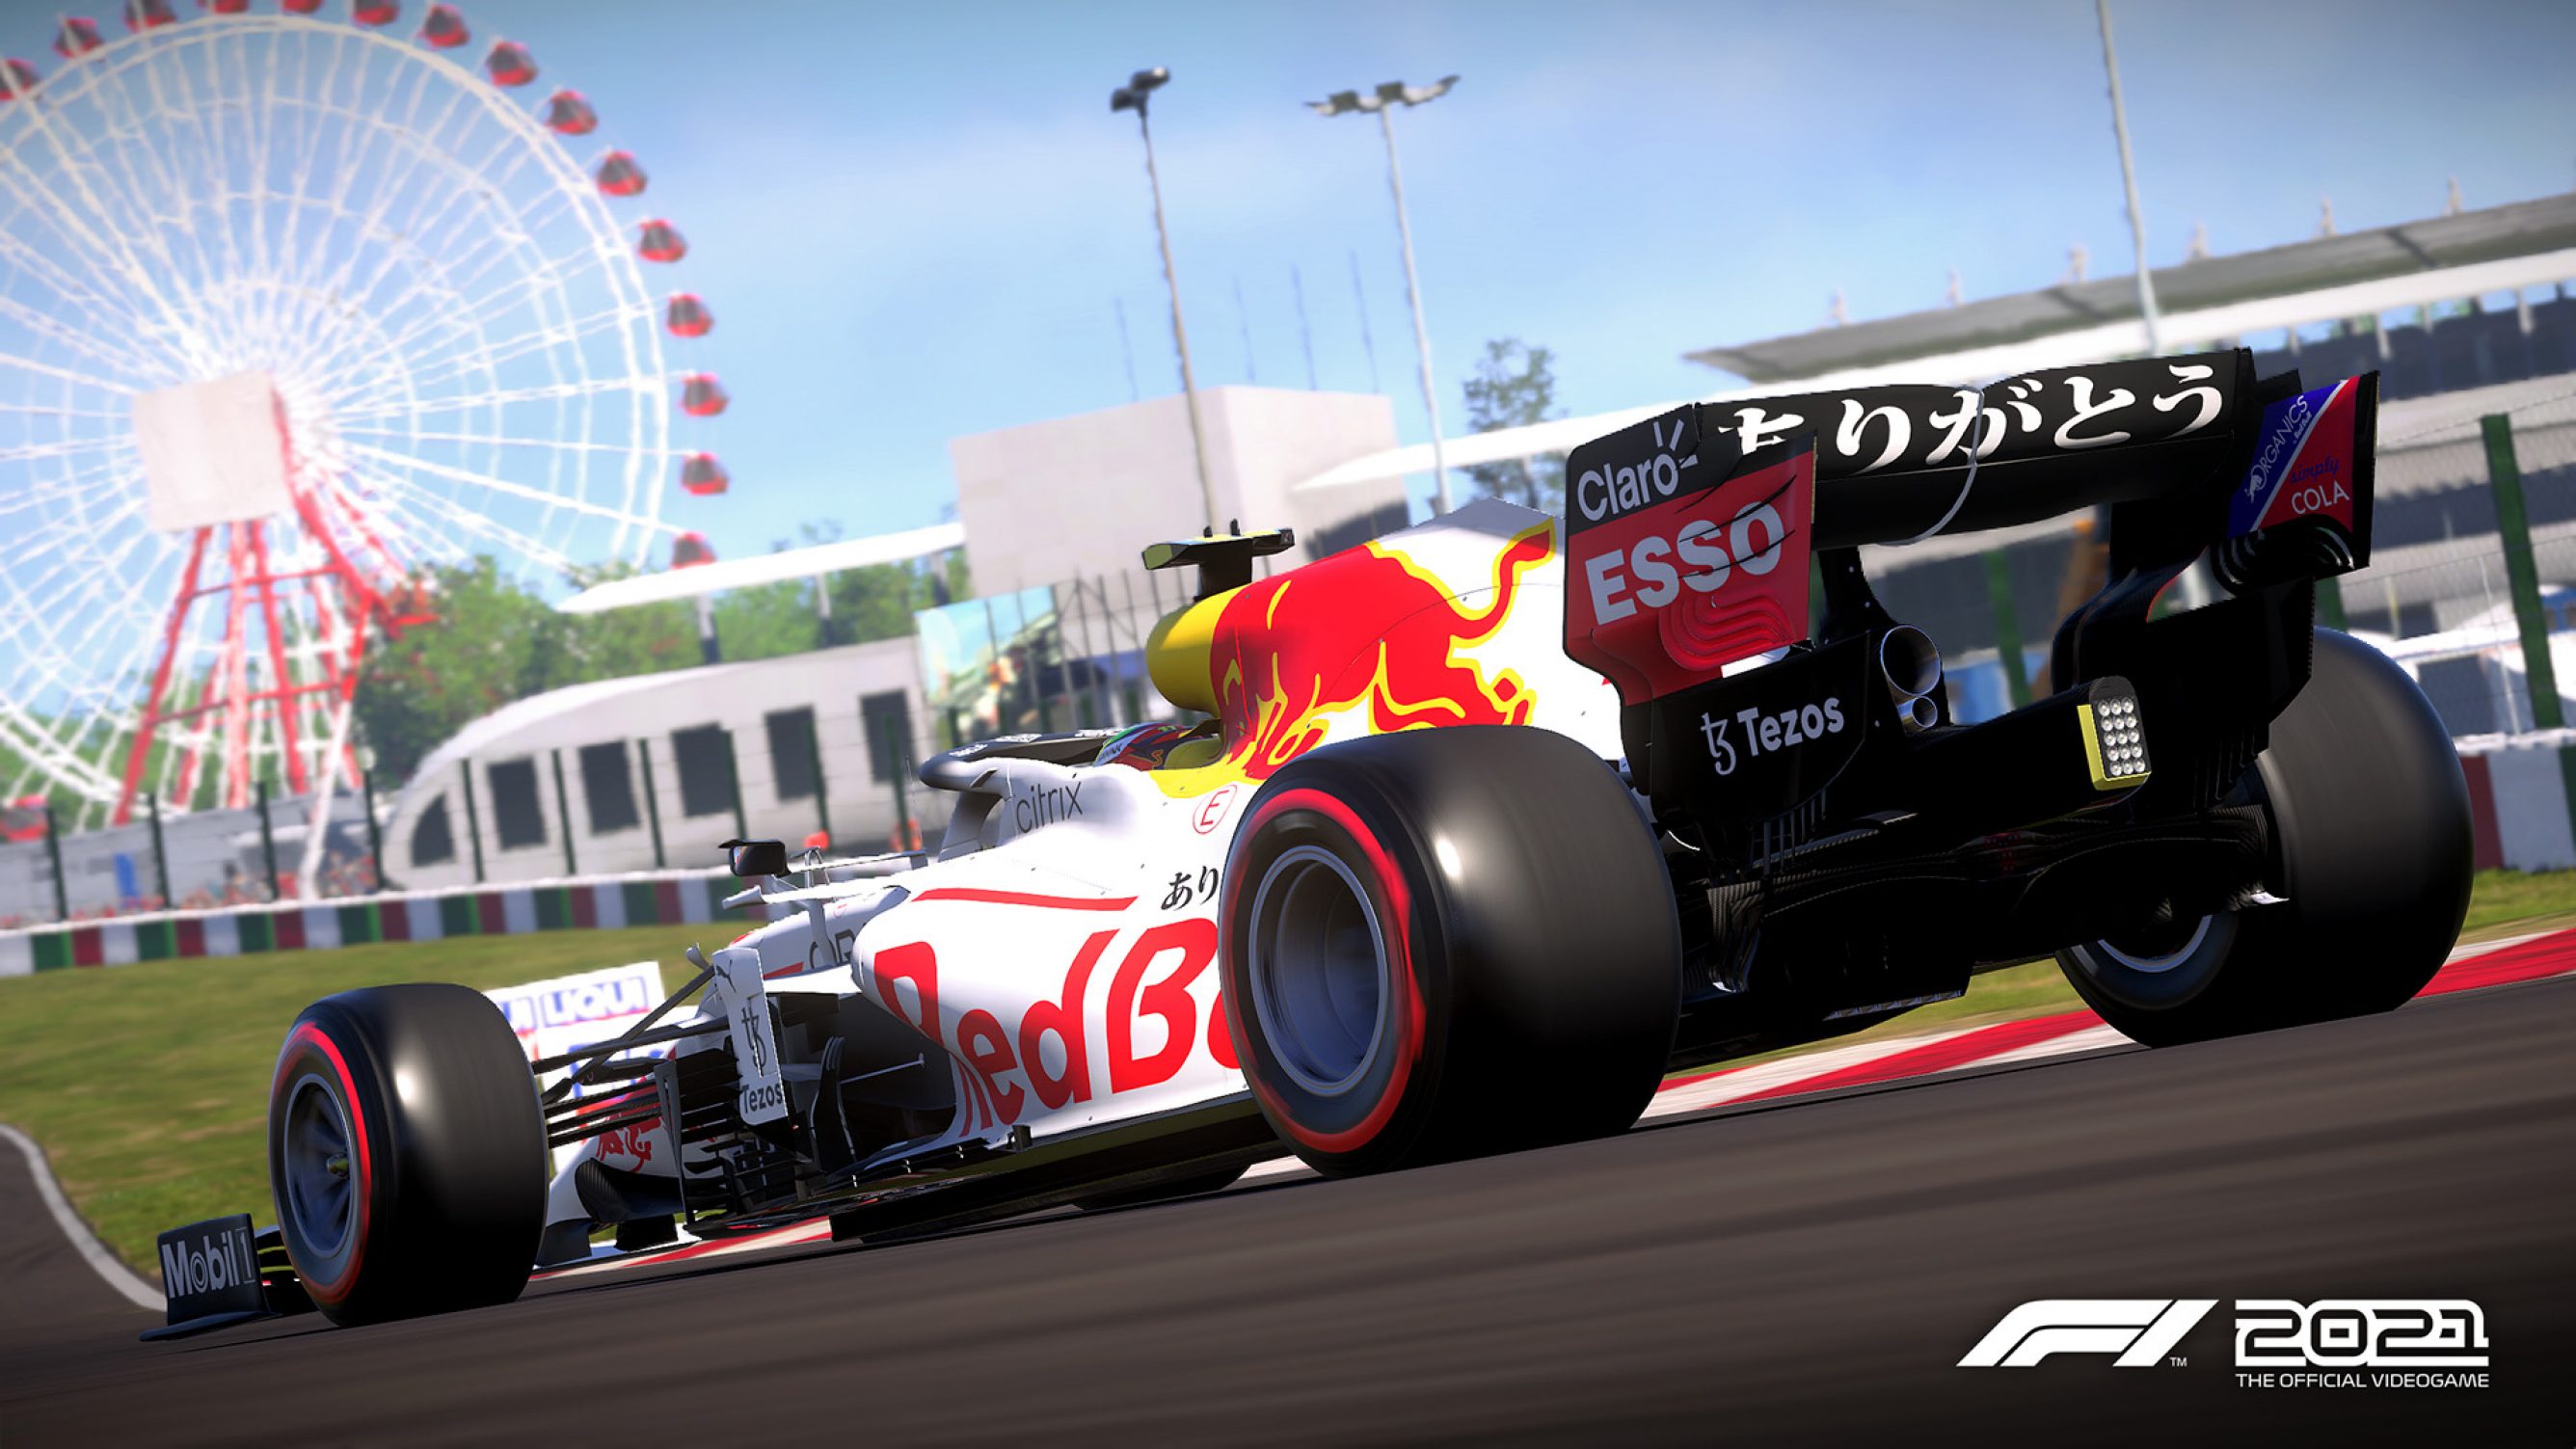 F1 2021 Update Adds Imola and Time-Limited Special Red Bull Livery